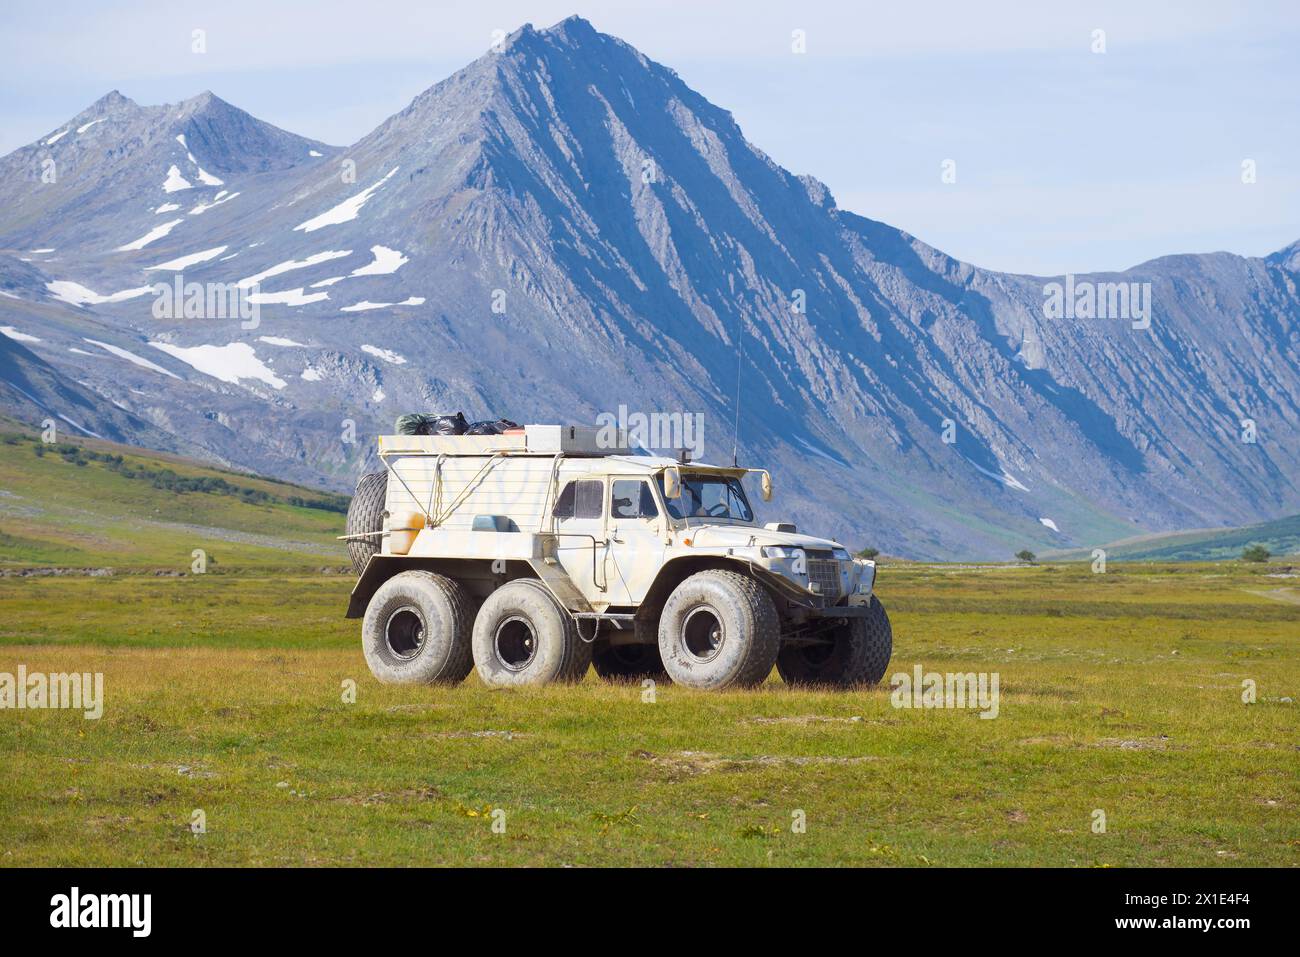 YAMAL, RUSSIA - AUGUST 27, 2018: The Trekol all-terrain vehicle against the background of mountains of Polar Ural in the sunny summer day Stock Photo